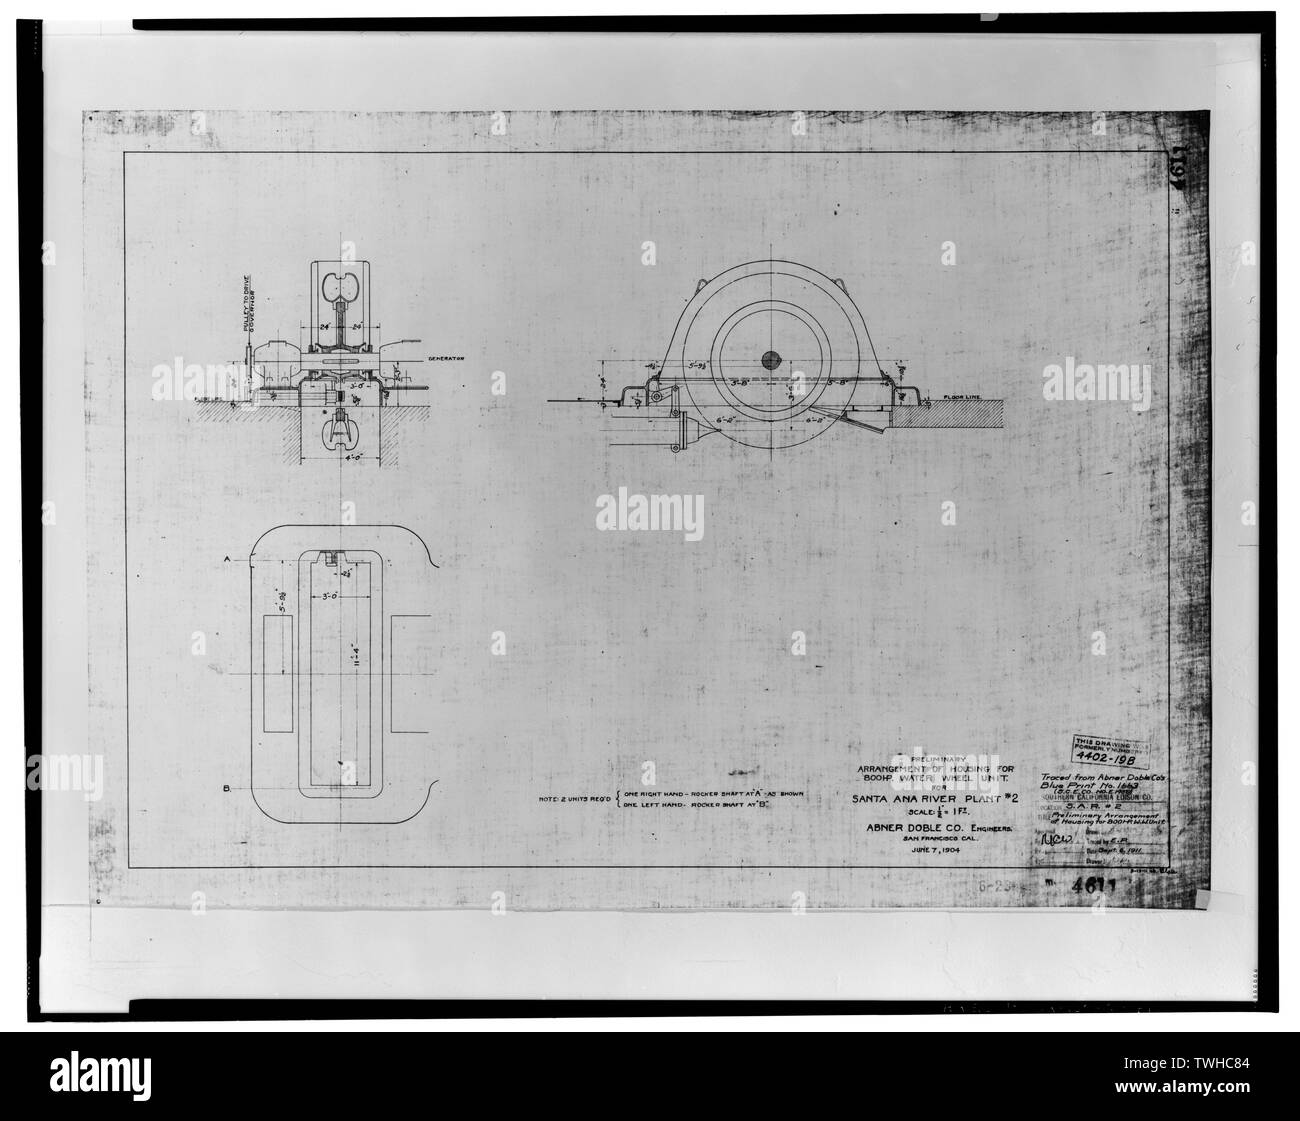 S.A.R. -2 PRELIMINARY ARRANGEMENT OF HOUSING FOR 800 HORSEPOWER WATER WHEEL UNIT, JUNE 7, 1904. TRACED ON SEPT. 6, 1911 BY E.P., FROM ABNER DOBLE CO'S. BLUE PRINT NO. 1663. SCE drawing no. 4611. - Santa Ana River Hydroelectric System, SAR-2 Powerhouse, Redlands, San Bernardino County, CA Stock Photo